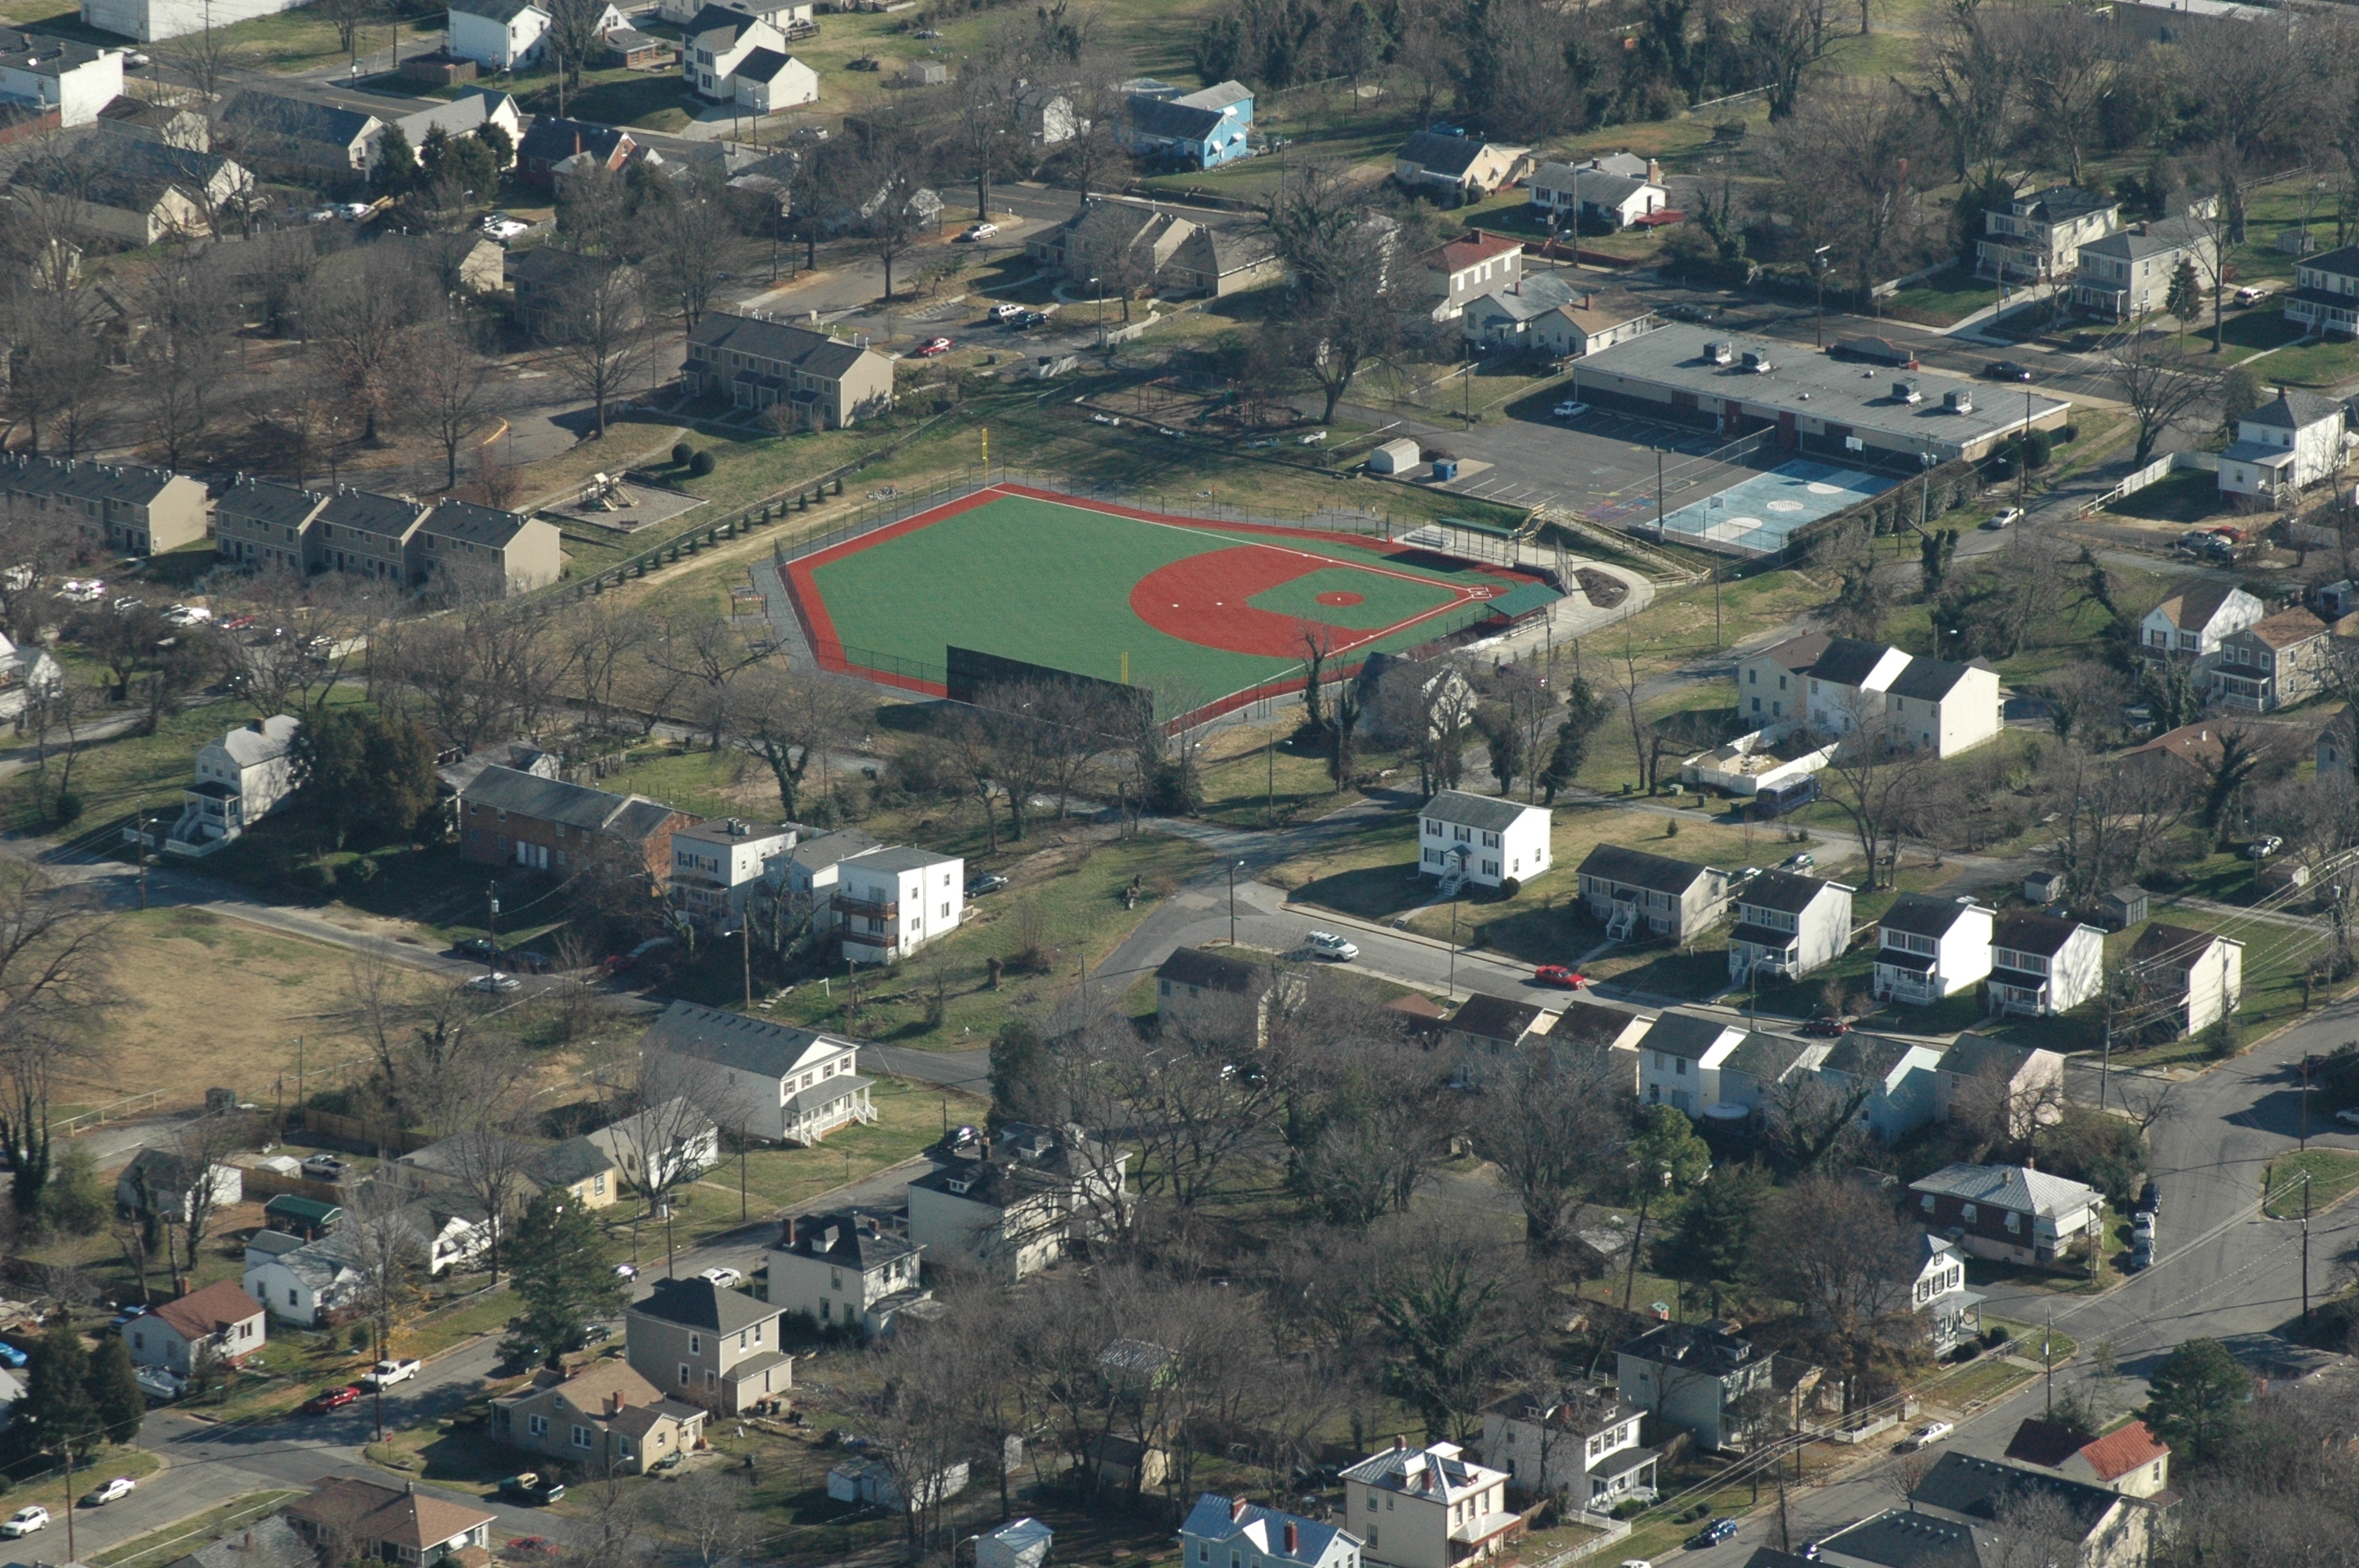 Richmond field from above